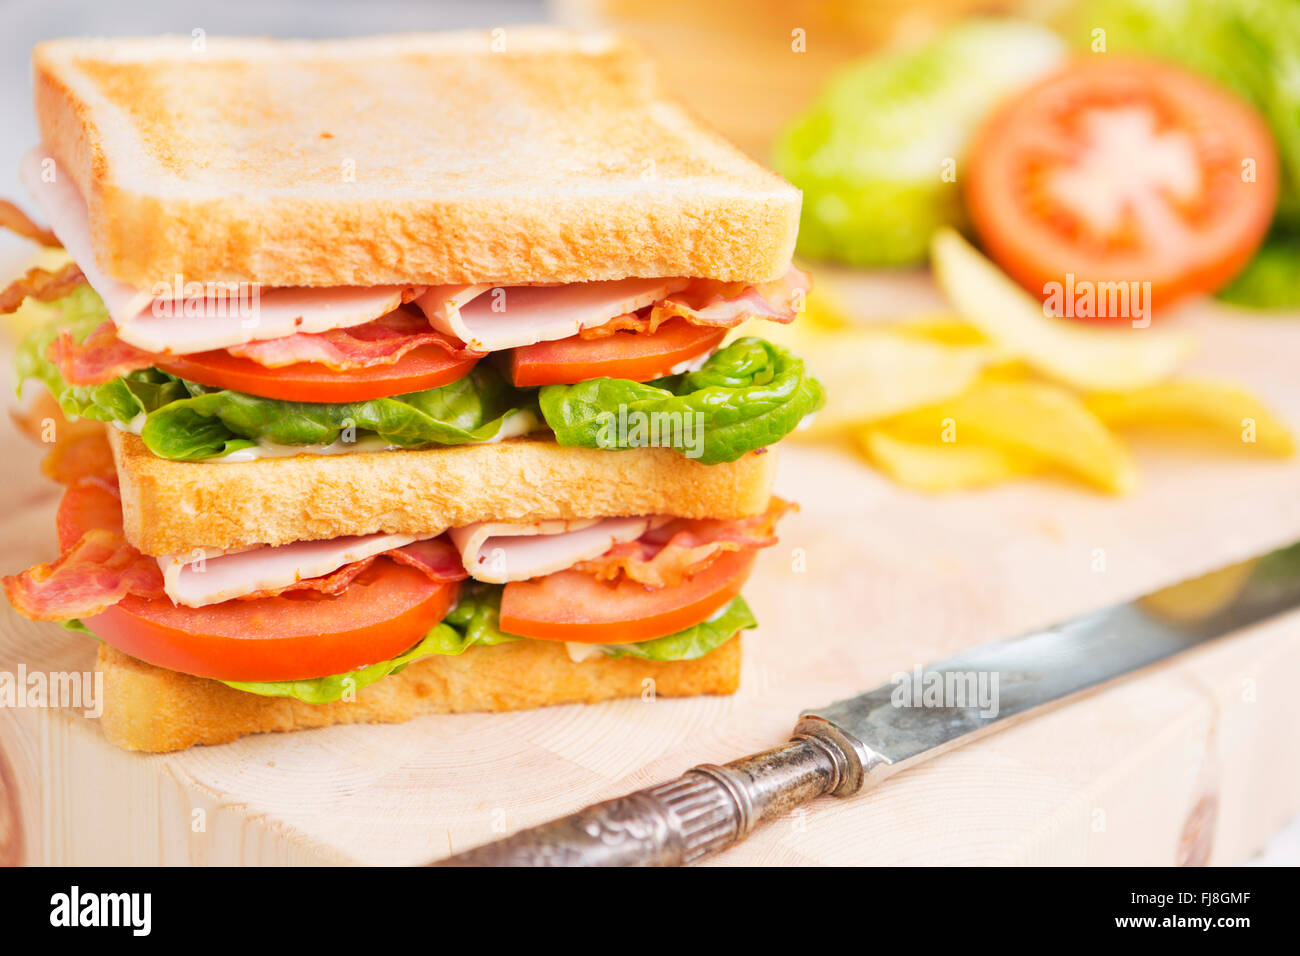 A club sandwich on a rustic table in bright light. Stock Photo